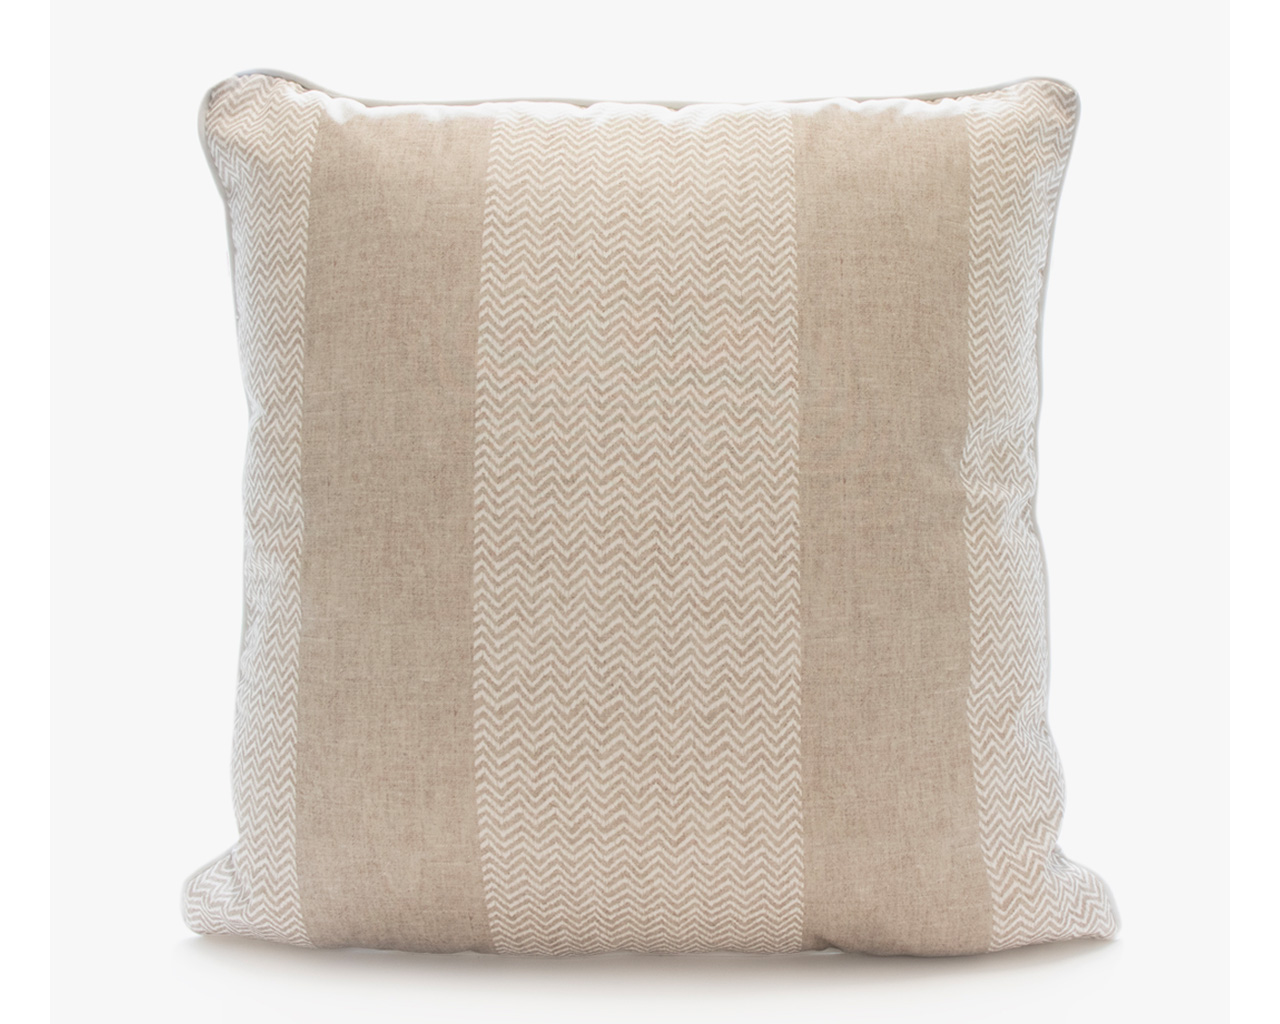 Madras Link Isla Stripe Natural Outdoor Cushion - 50x50cm, , hi-res image number null